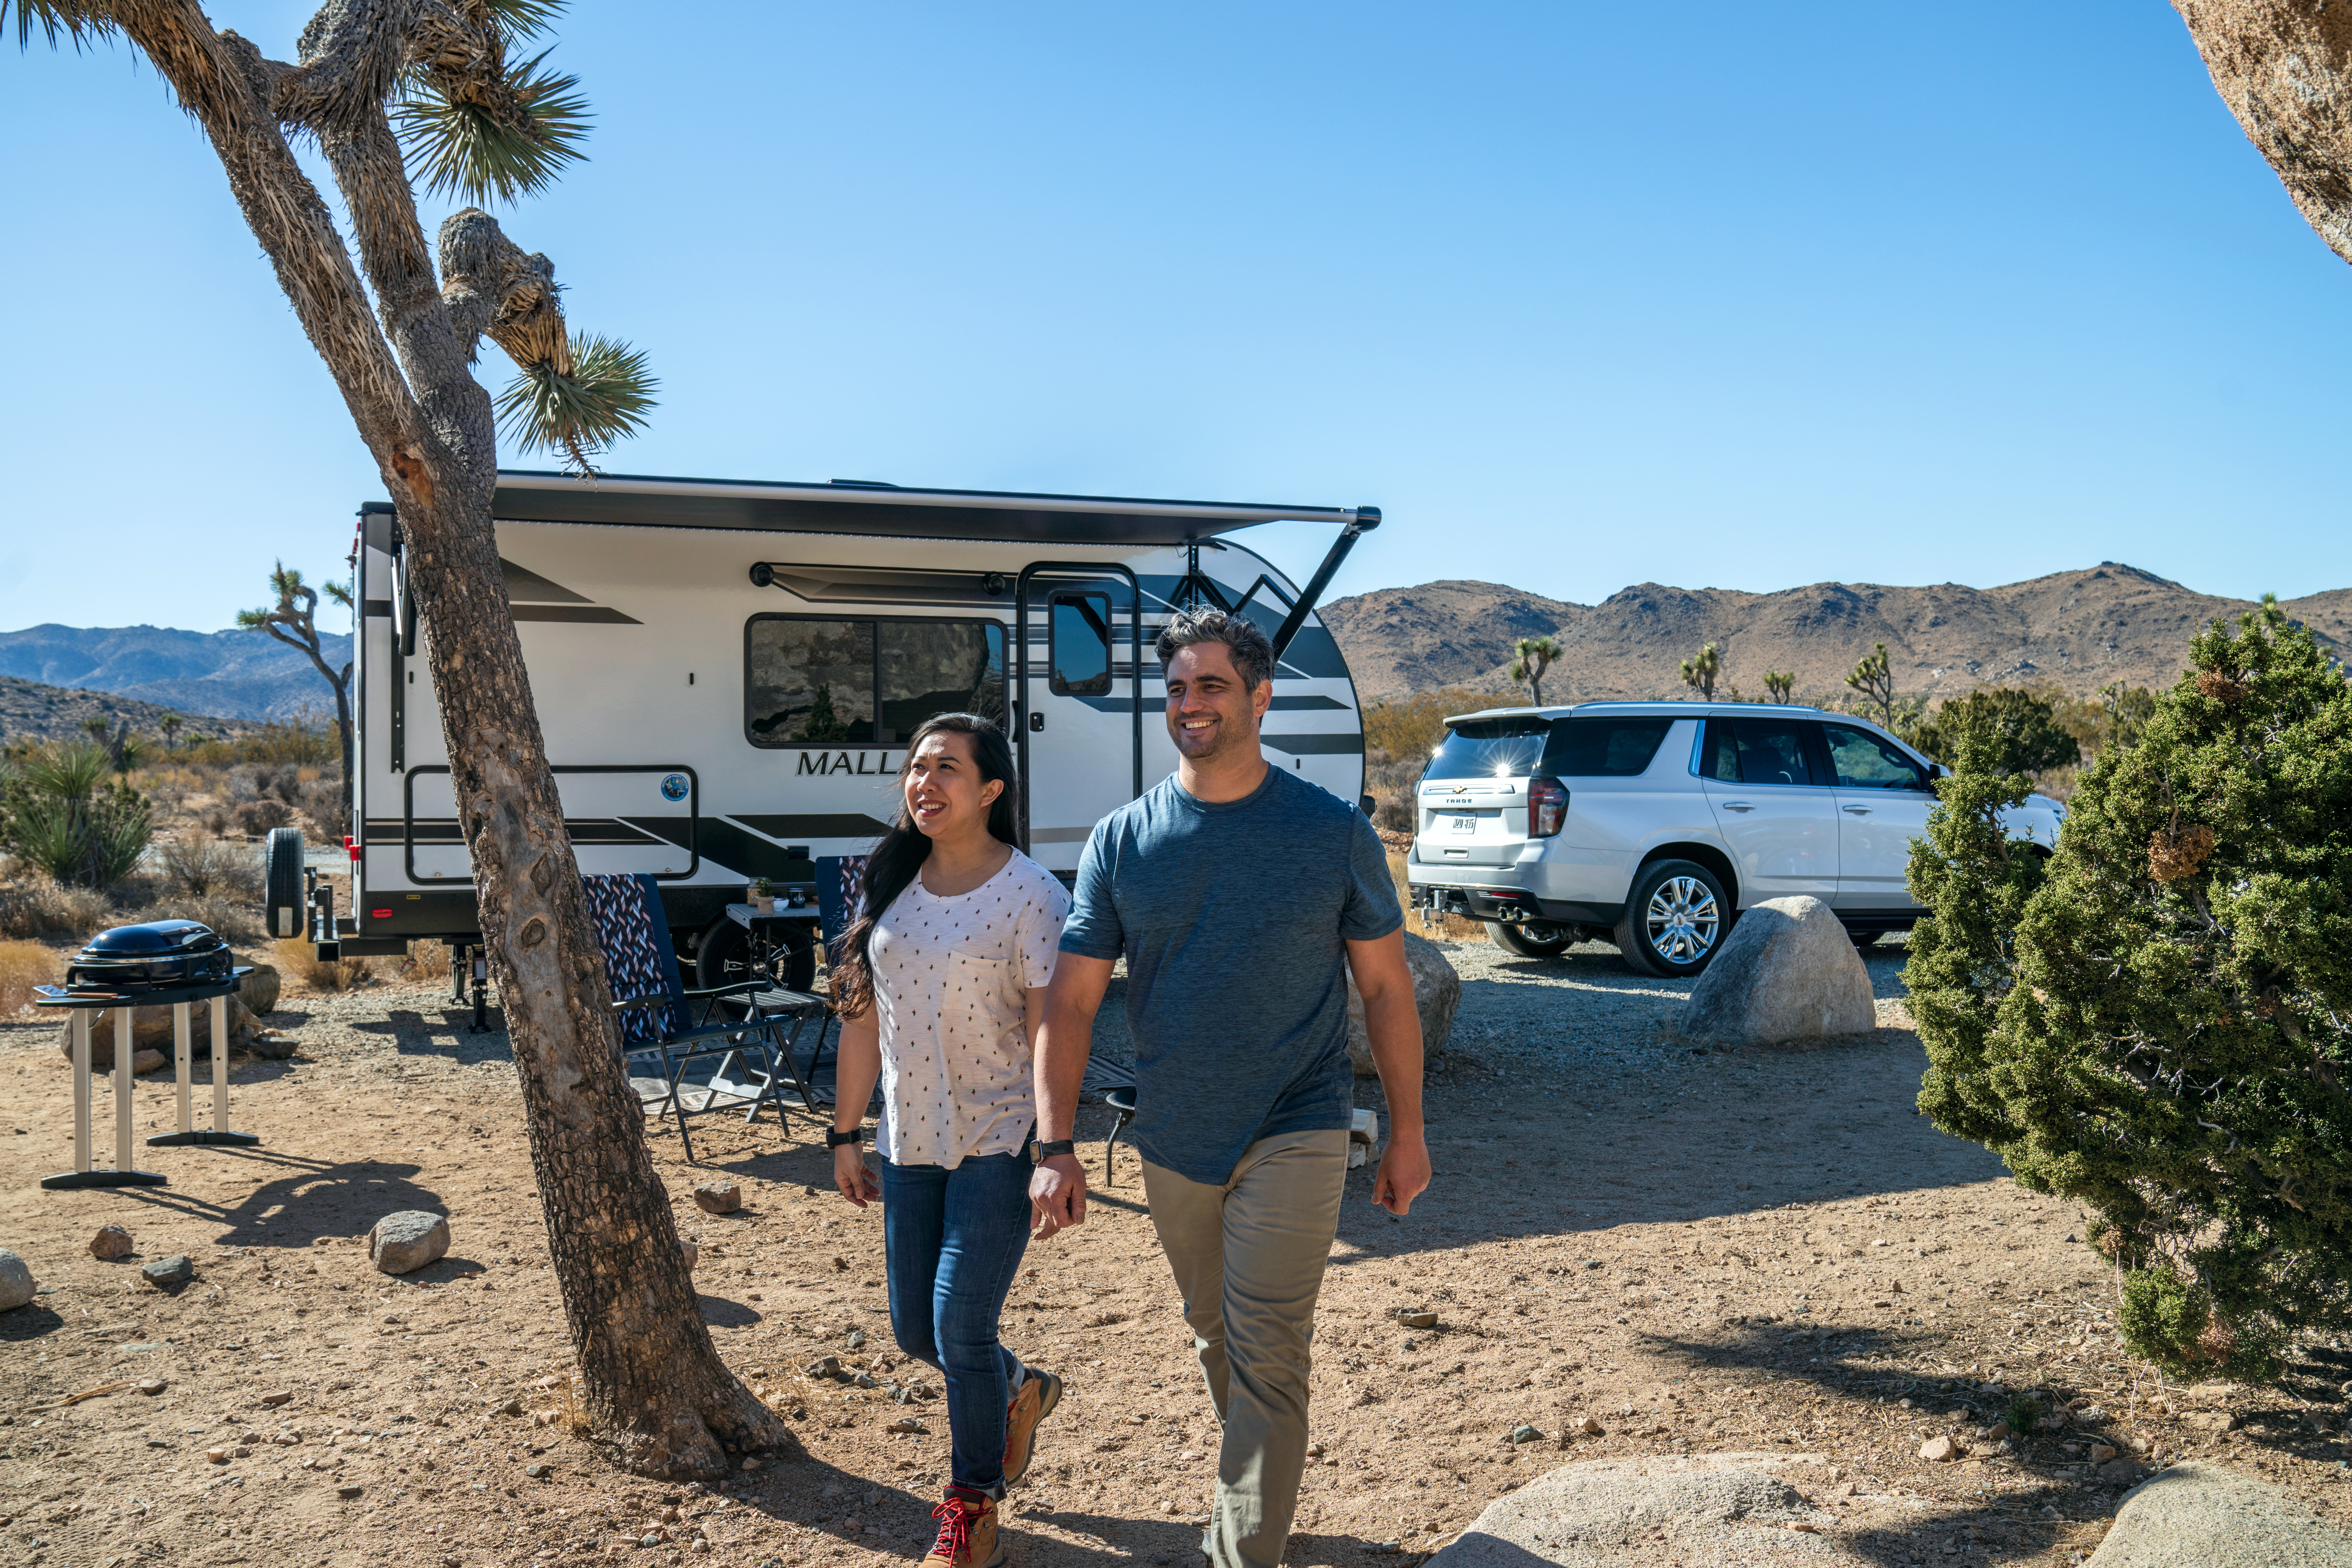 Taking your new RV out -- A couple embarks on a stroll through their campsite.